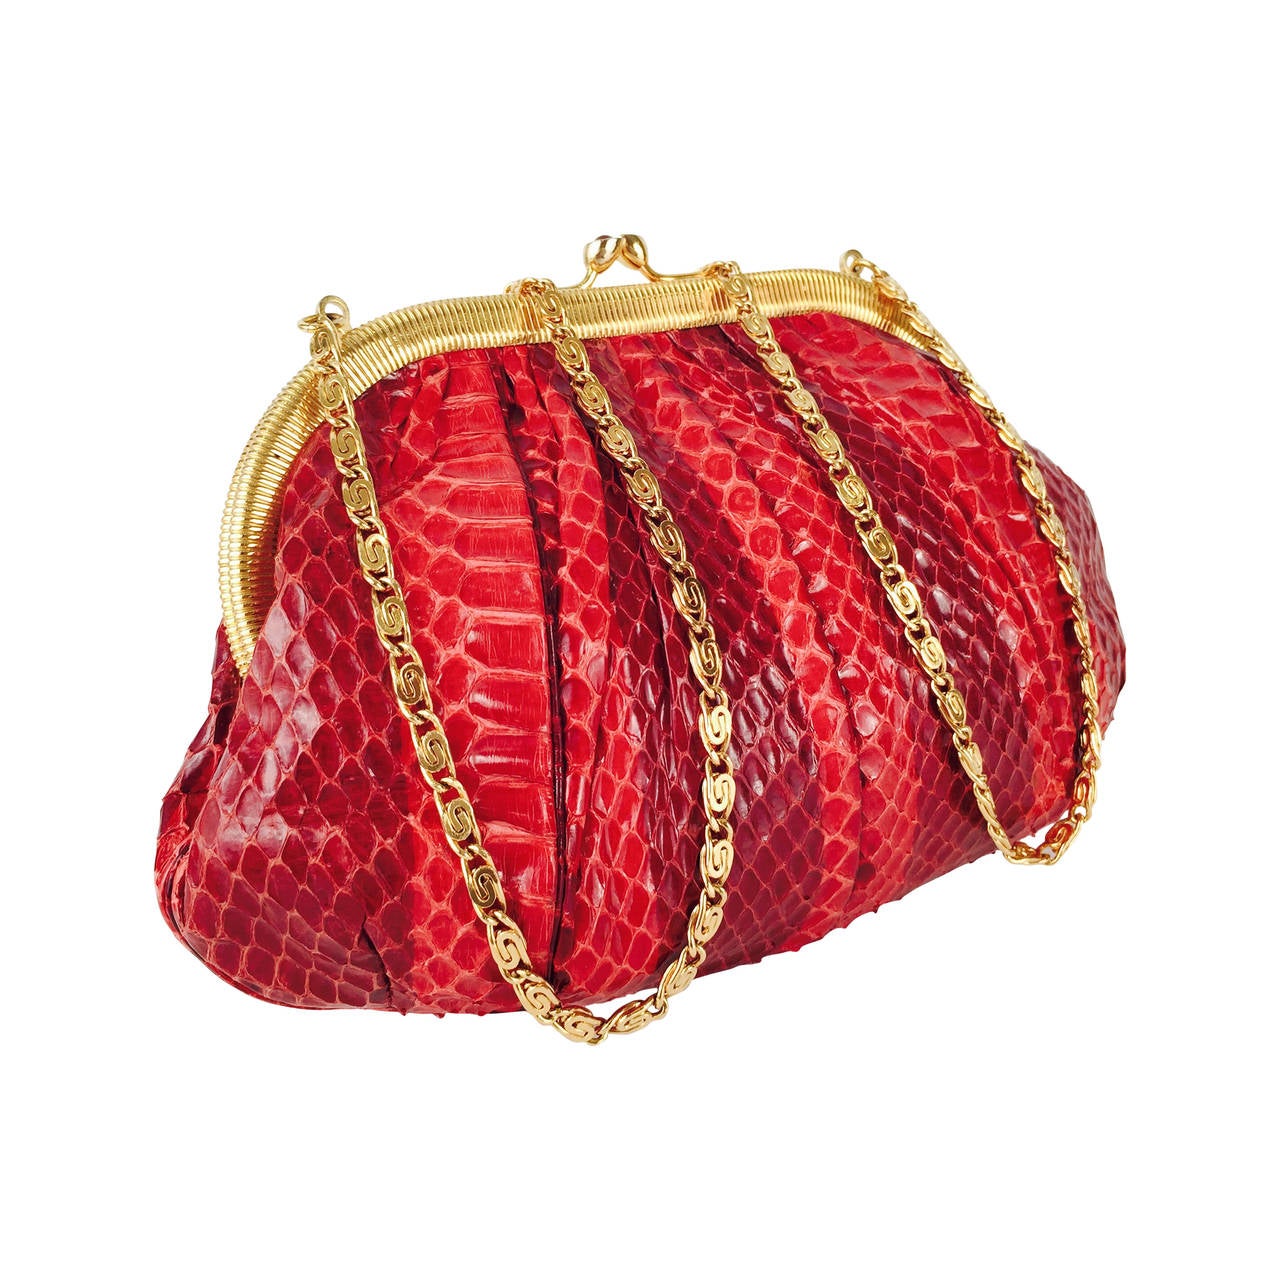 Judith Leiber Burgundy and Berry Snakeskin Evening Bag With Jeweled Clasp For Sale